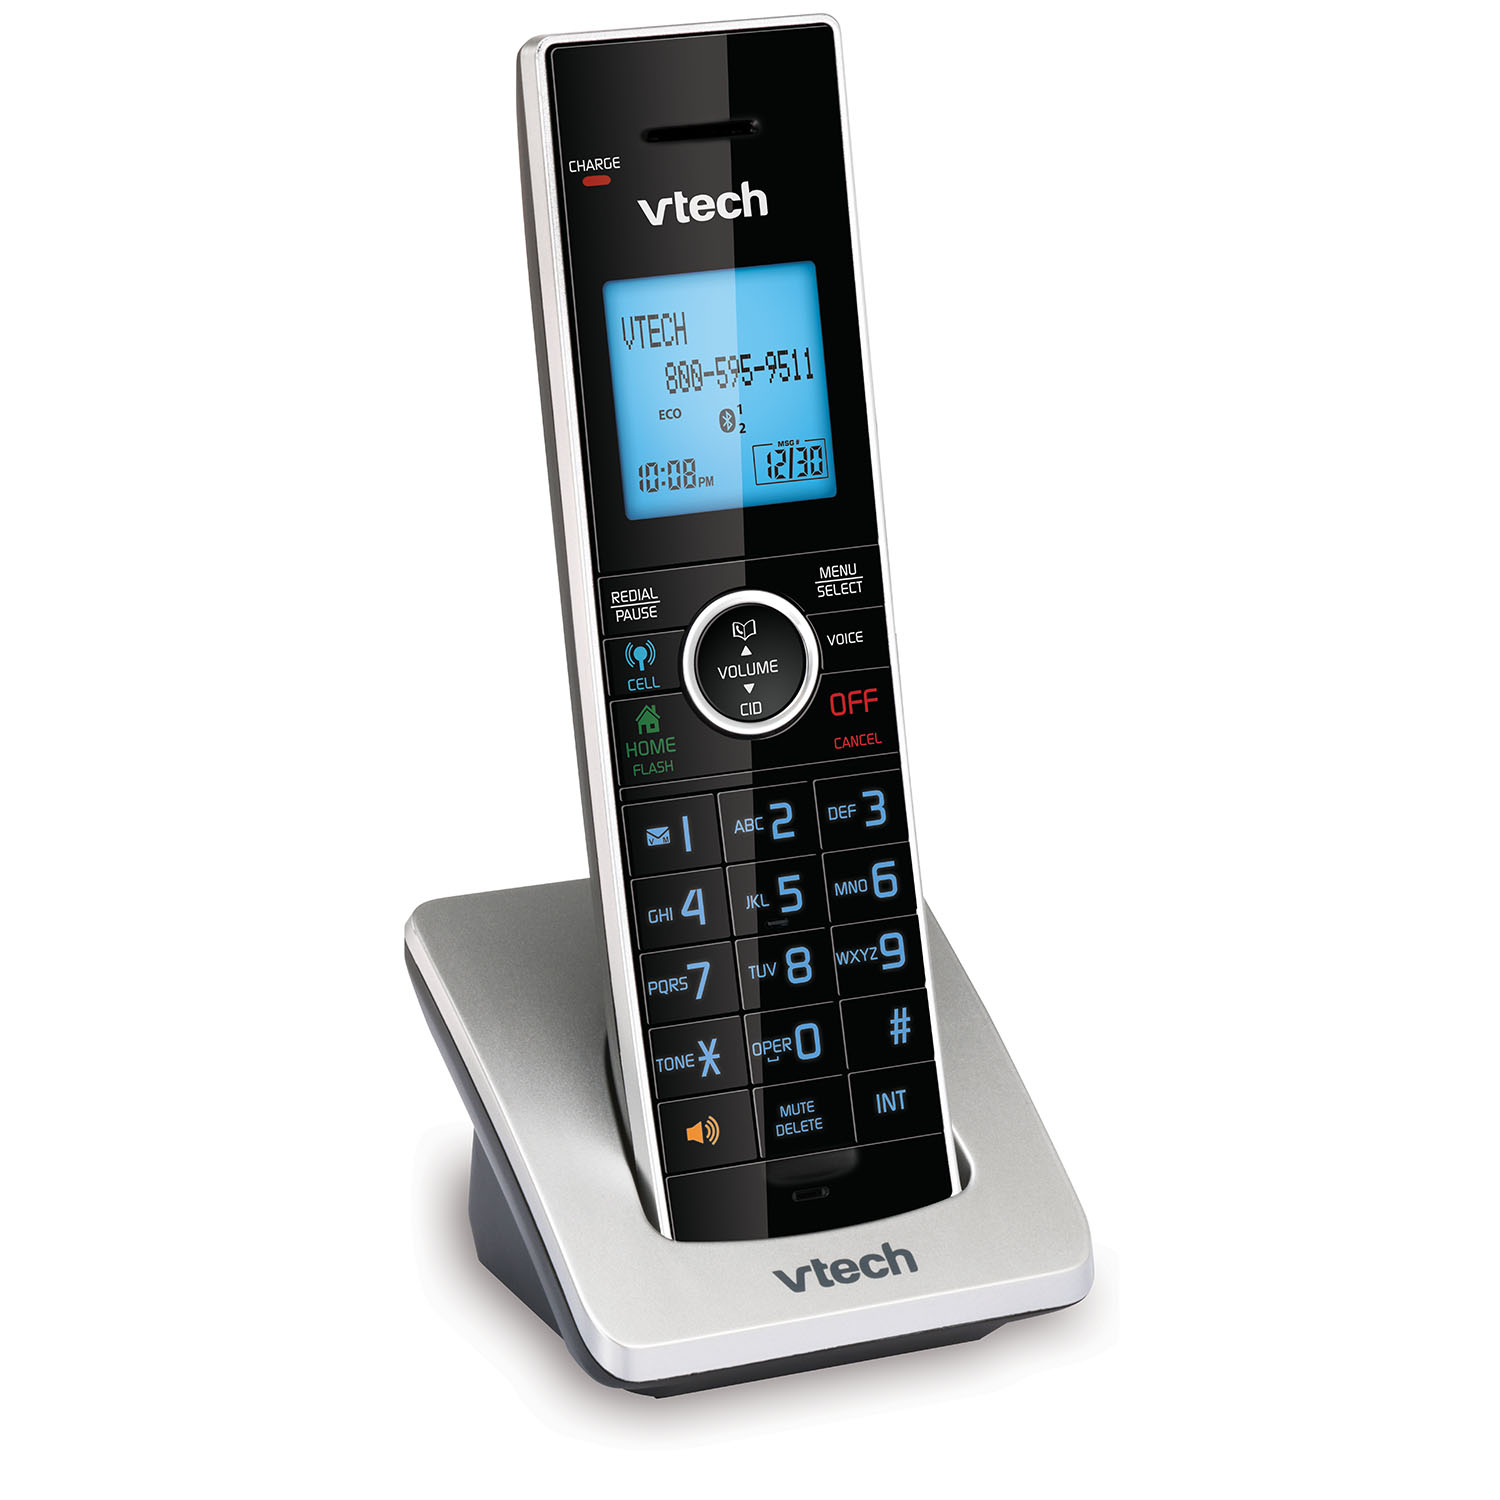 Display larger image of Accessory Handset with Caller ID/Call Waiting - view 3